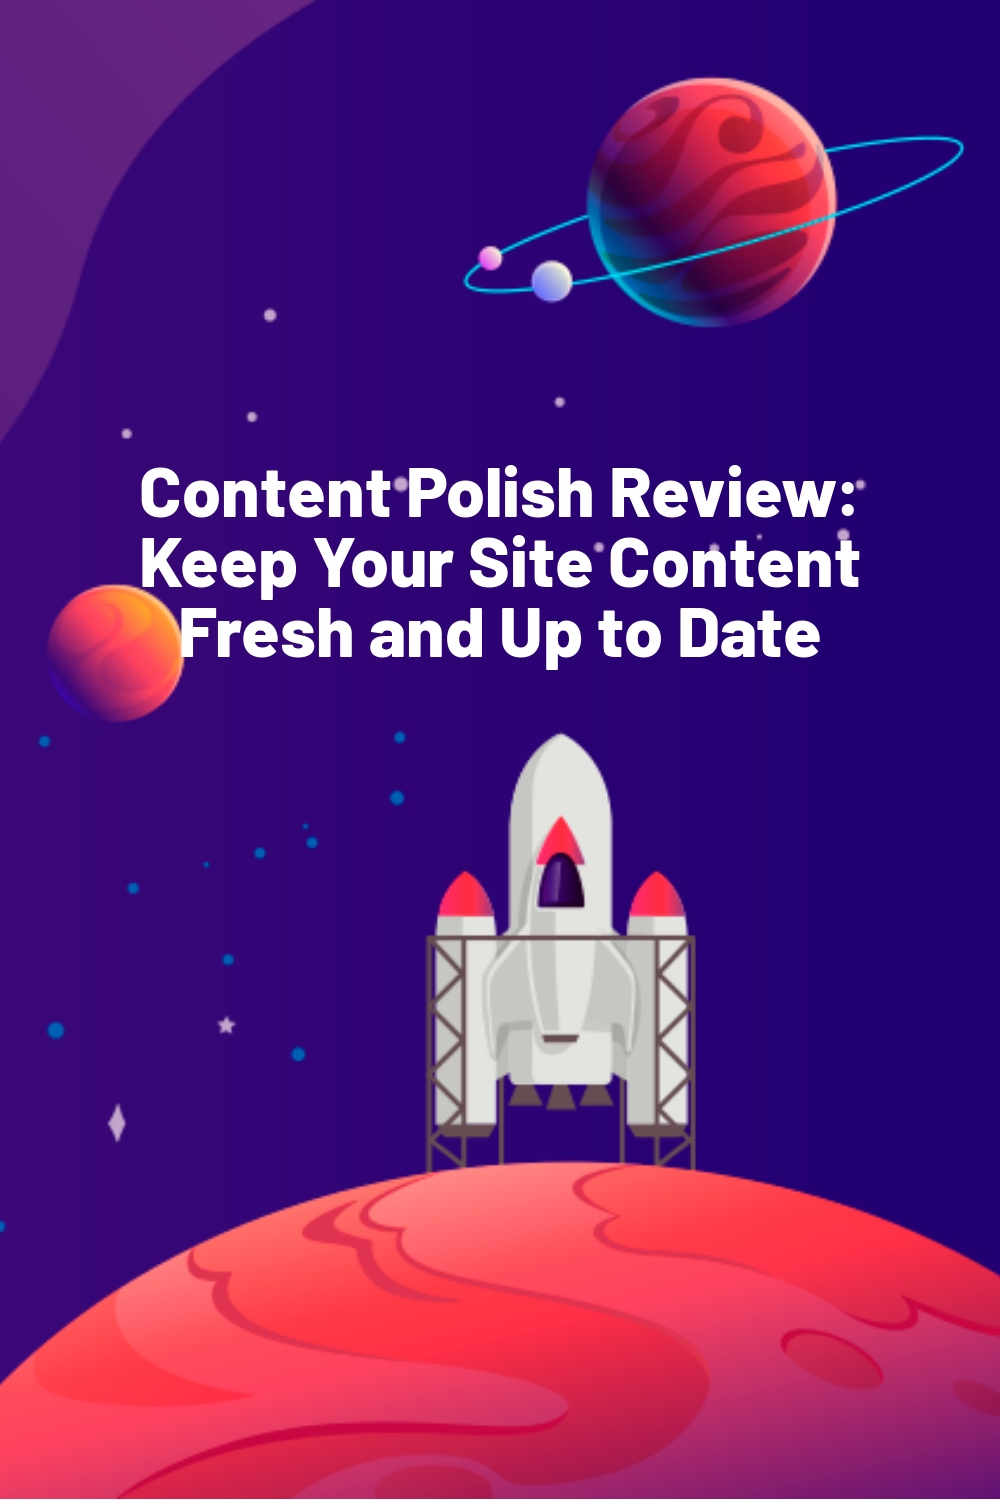 Content Polish Review: Keep Your Site Content Fresh and Up to Date